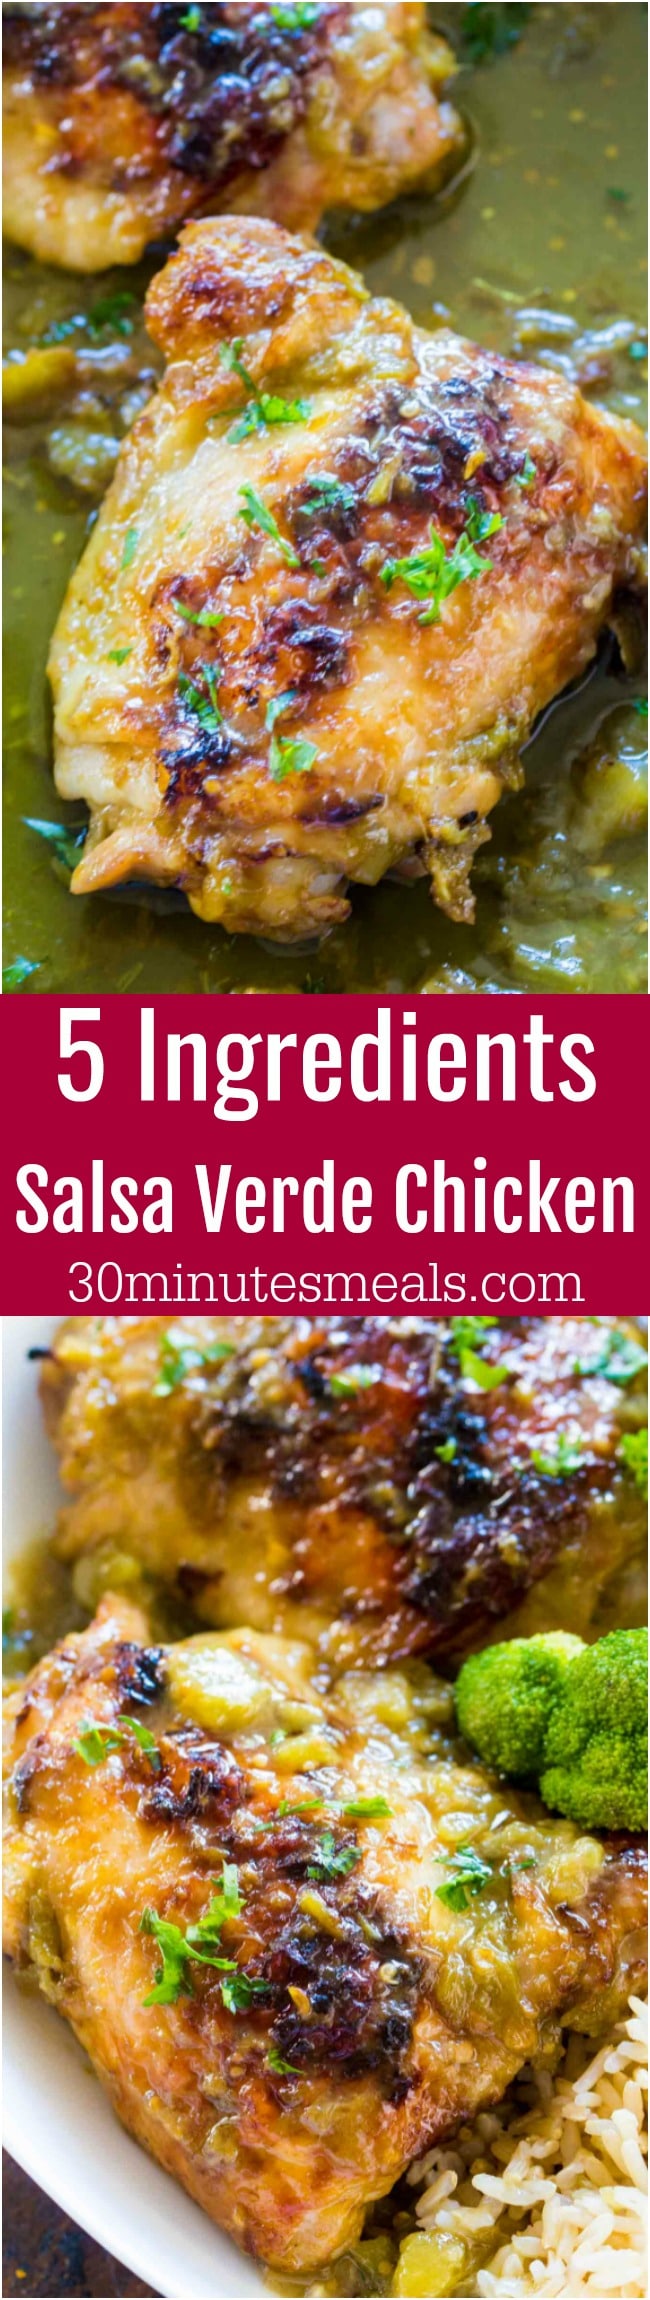 Green Chiles and Salsa Verde Chicken is such an easy and juicy way to prepare chicken in just 30 minutes with just 5 ingredients in one pan.